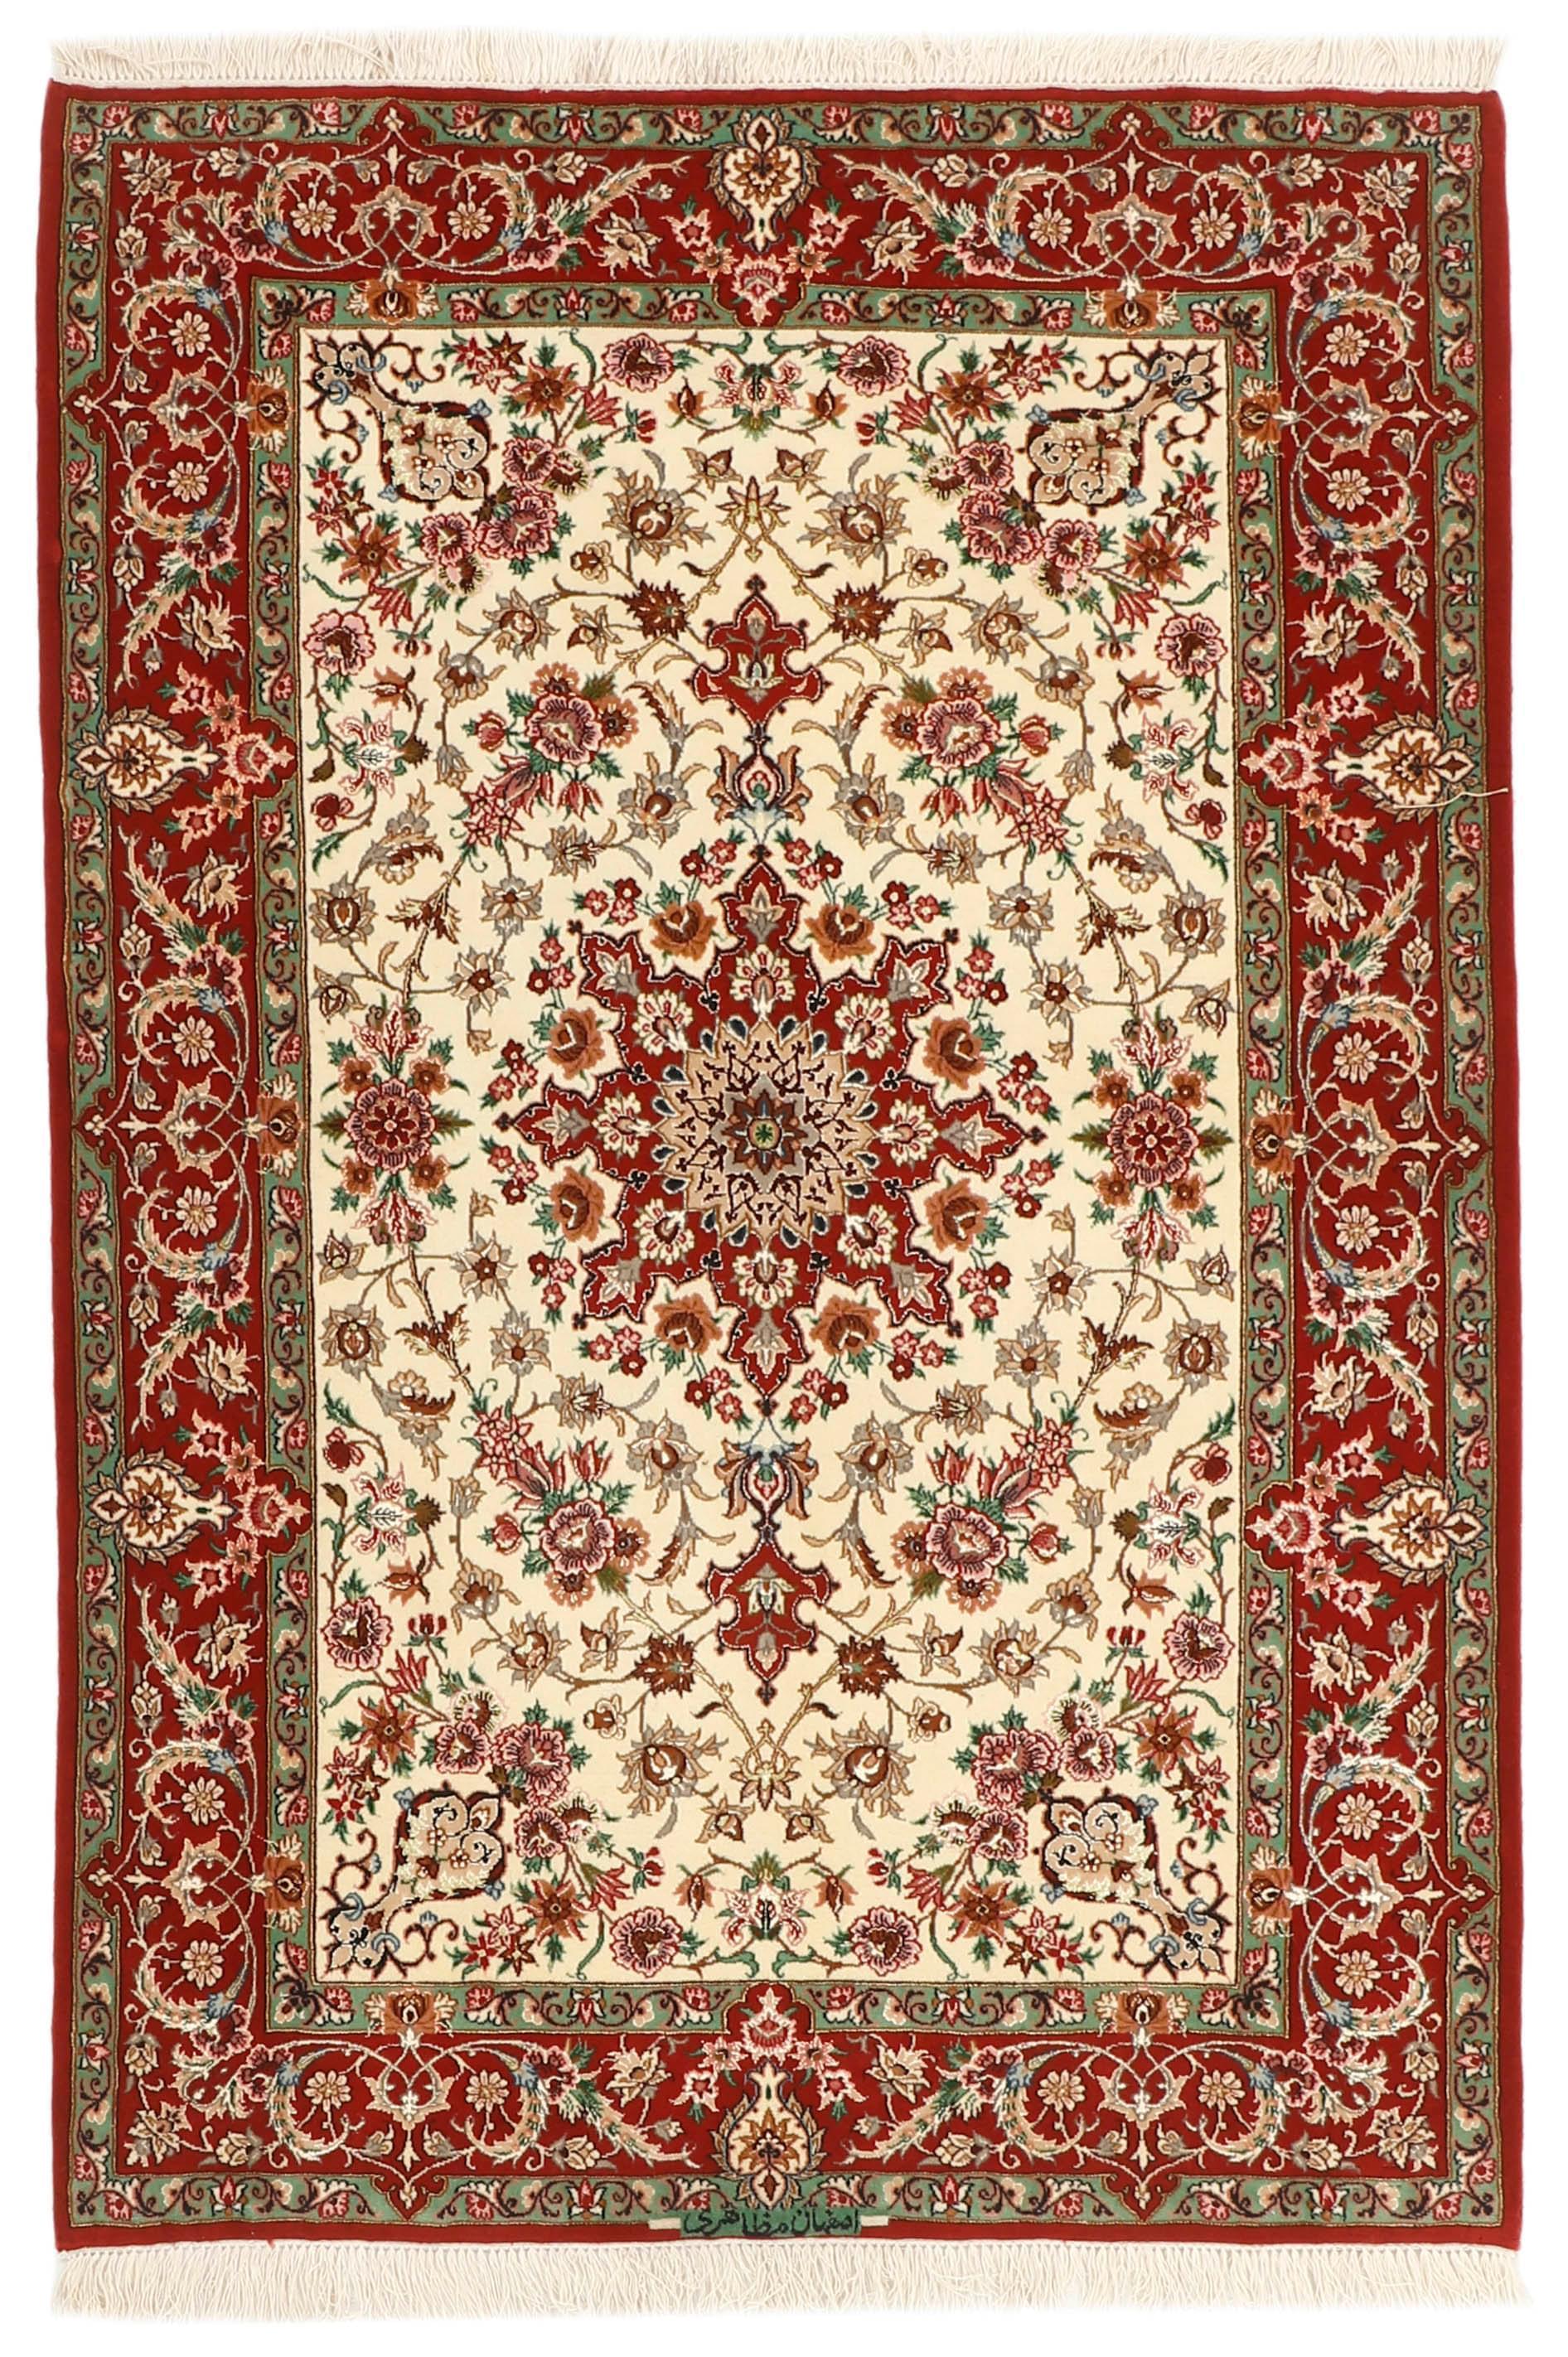 Authentic persian rug with traditional pattern in red and beige 